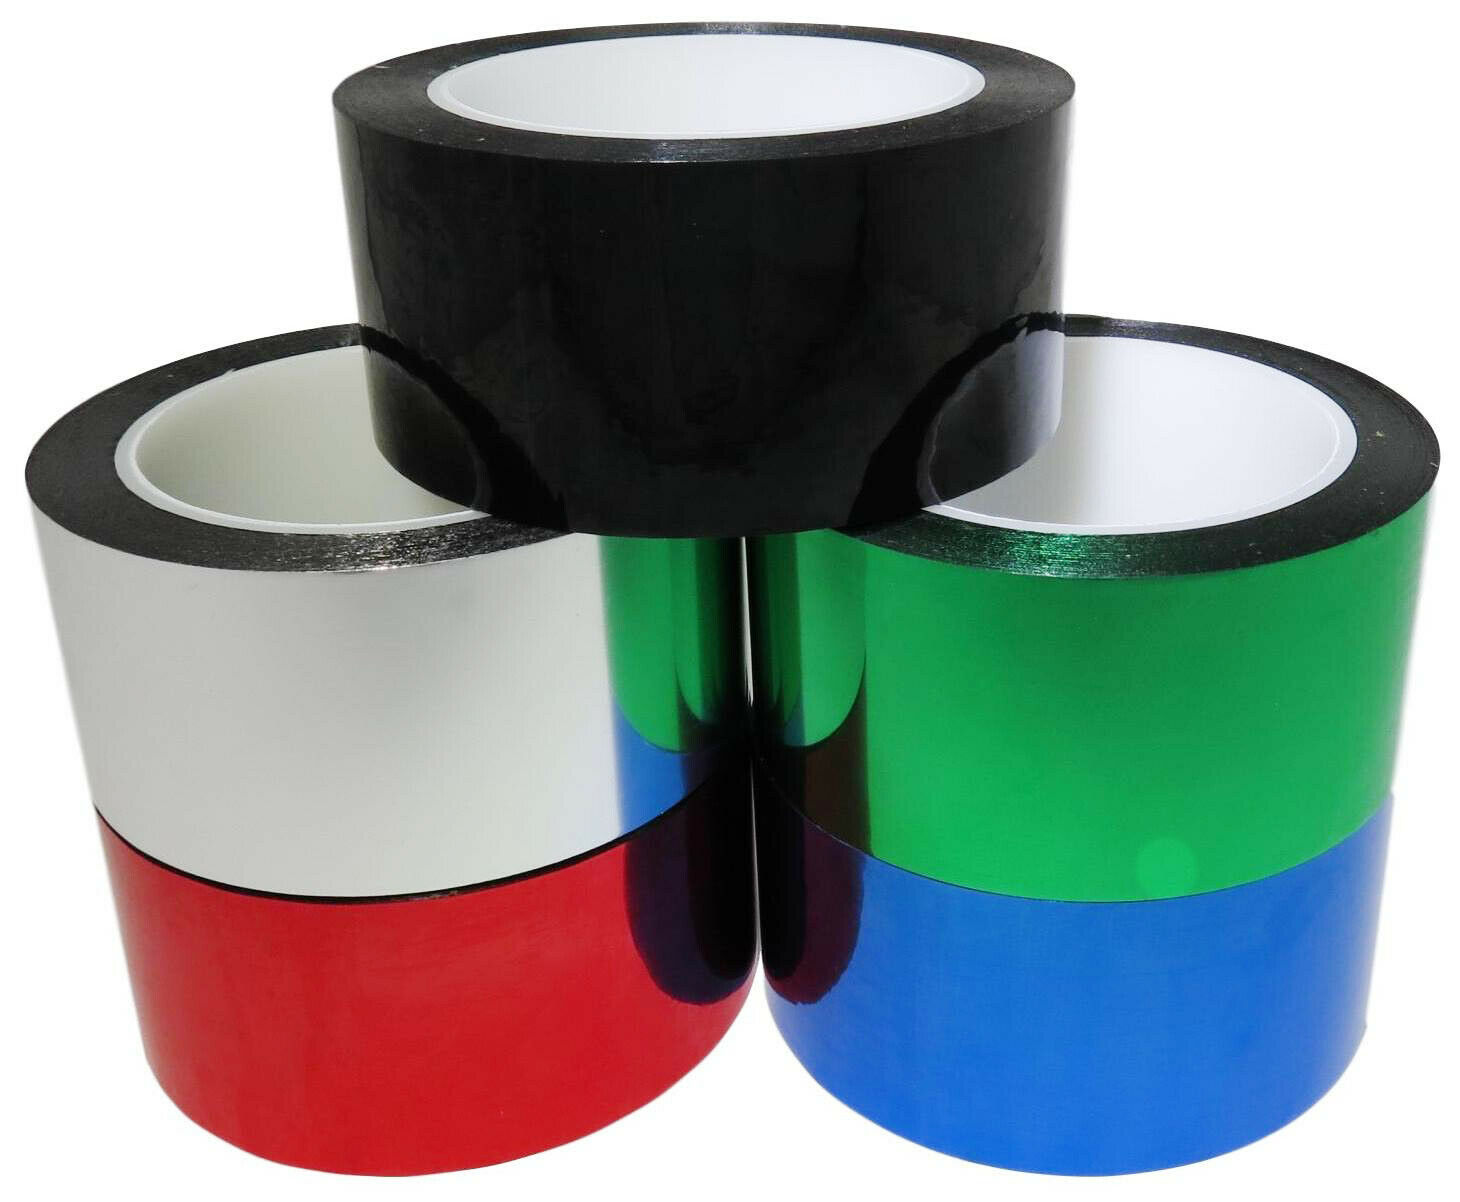 T.R.U. Mylar Metalized Polyester Film Tape with Acrylic Adhesive Multiple Colors